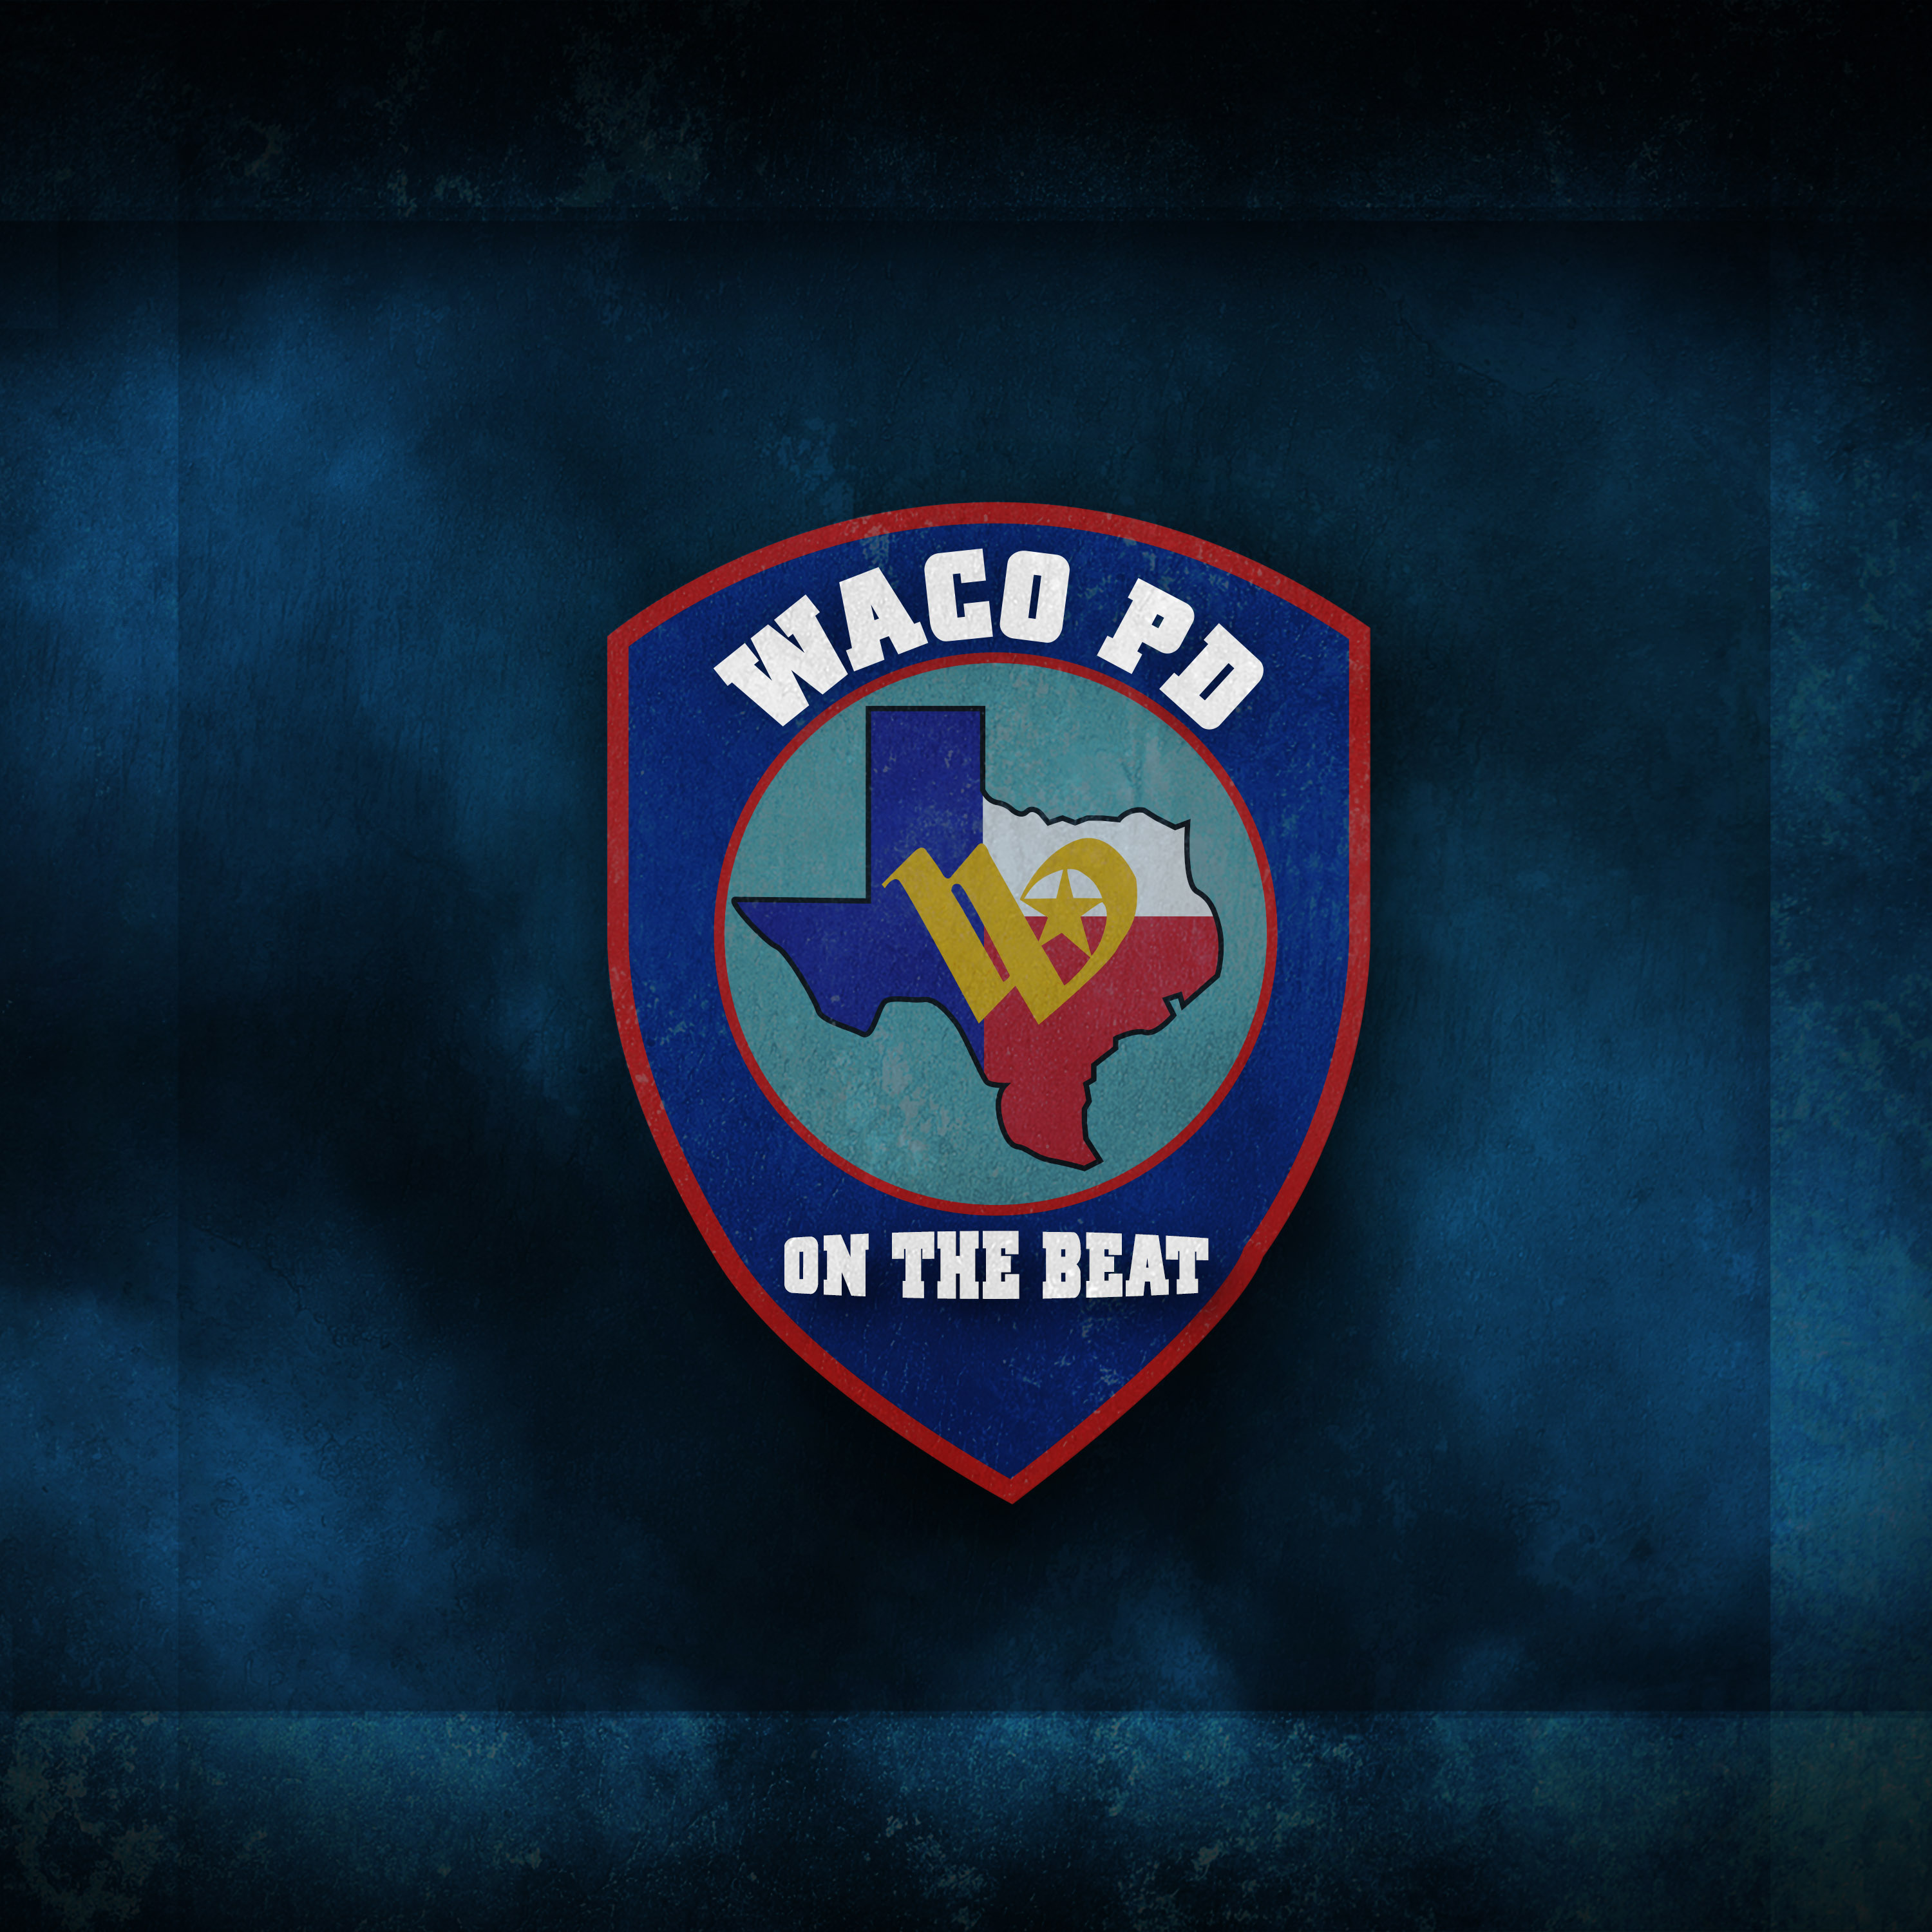 8: The new Social Worker at Waco PD